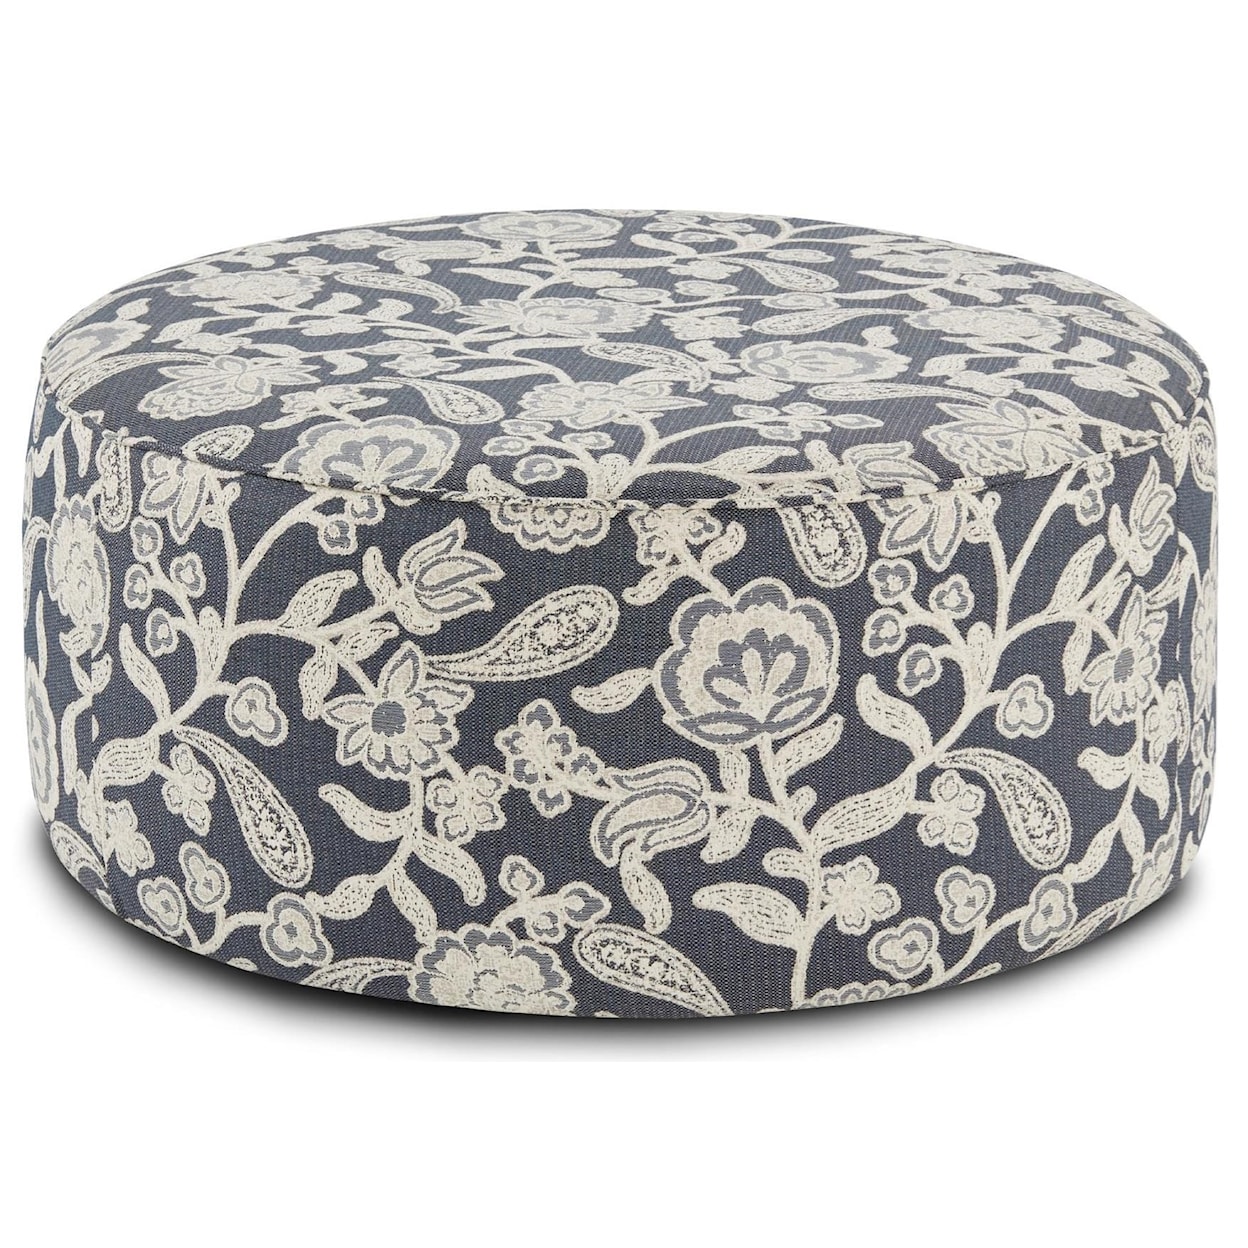 Fusion Furniture 39-00KP AWESOME OATMEAL (REV) Cocktail Ottoman